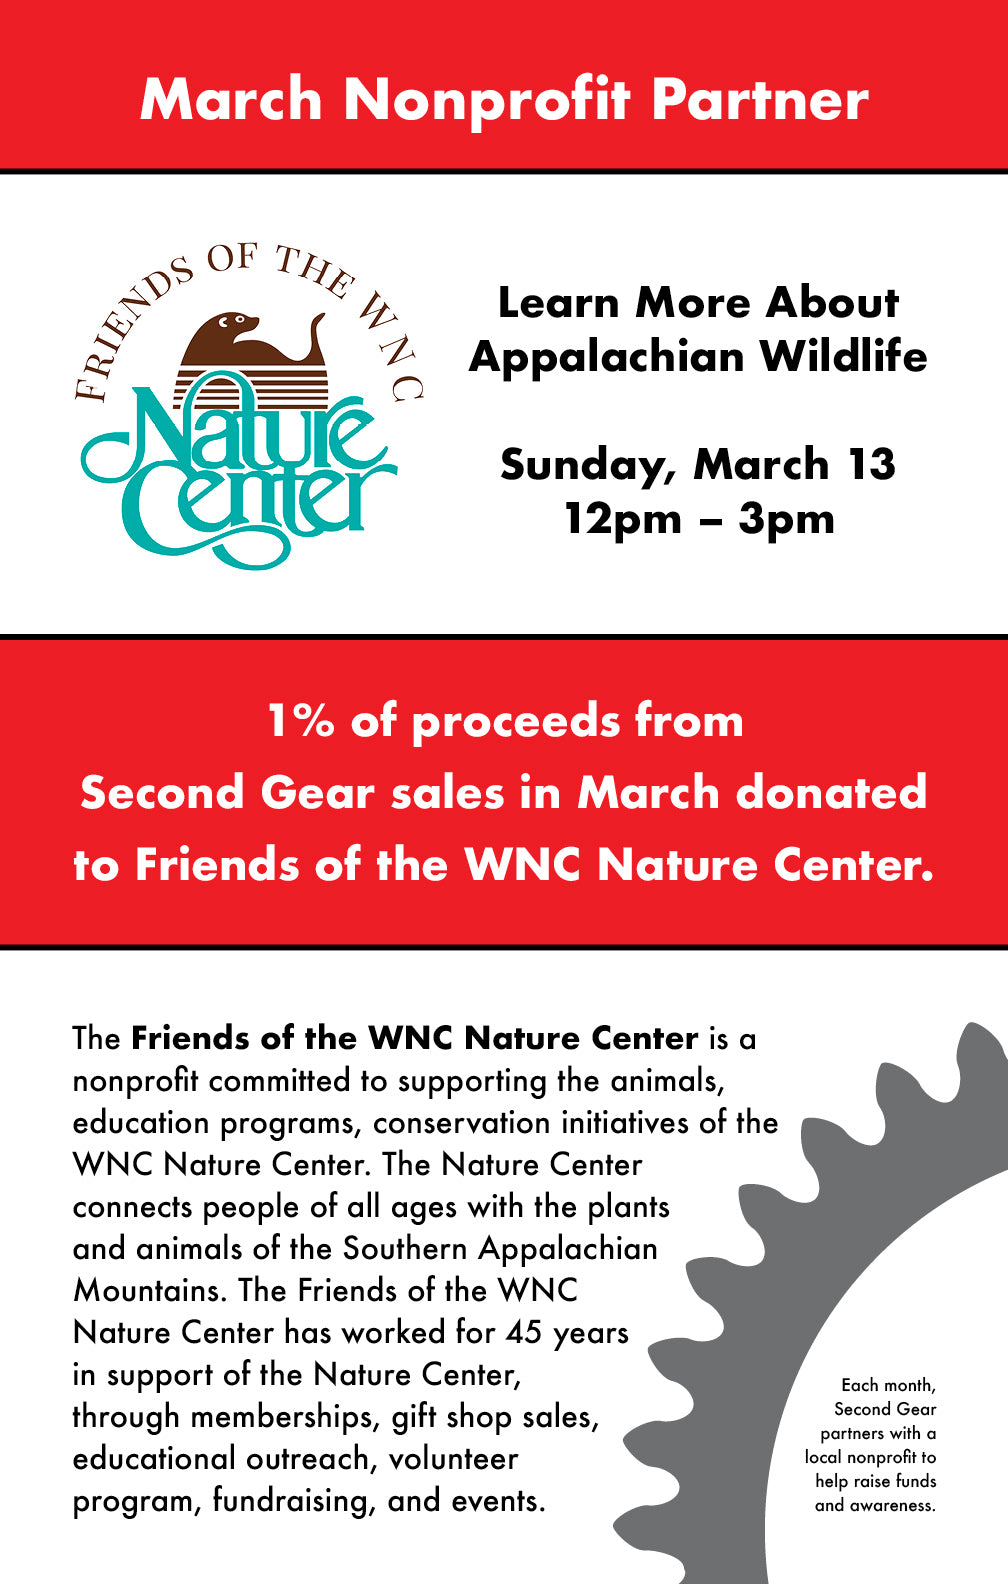 Second Gear's March Non-Profit: Friends of the WNC Nature Center